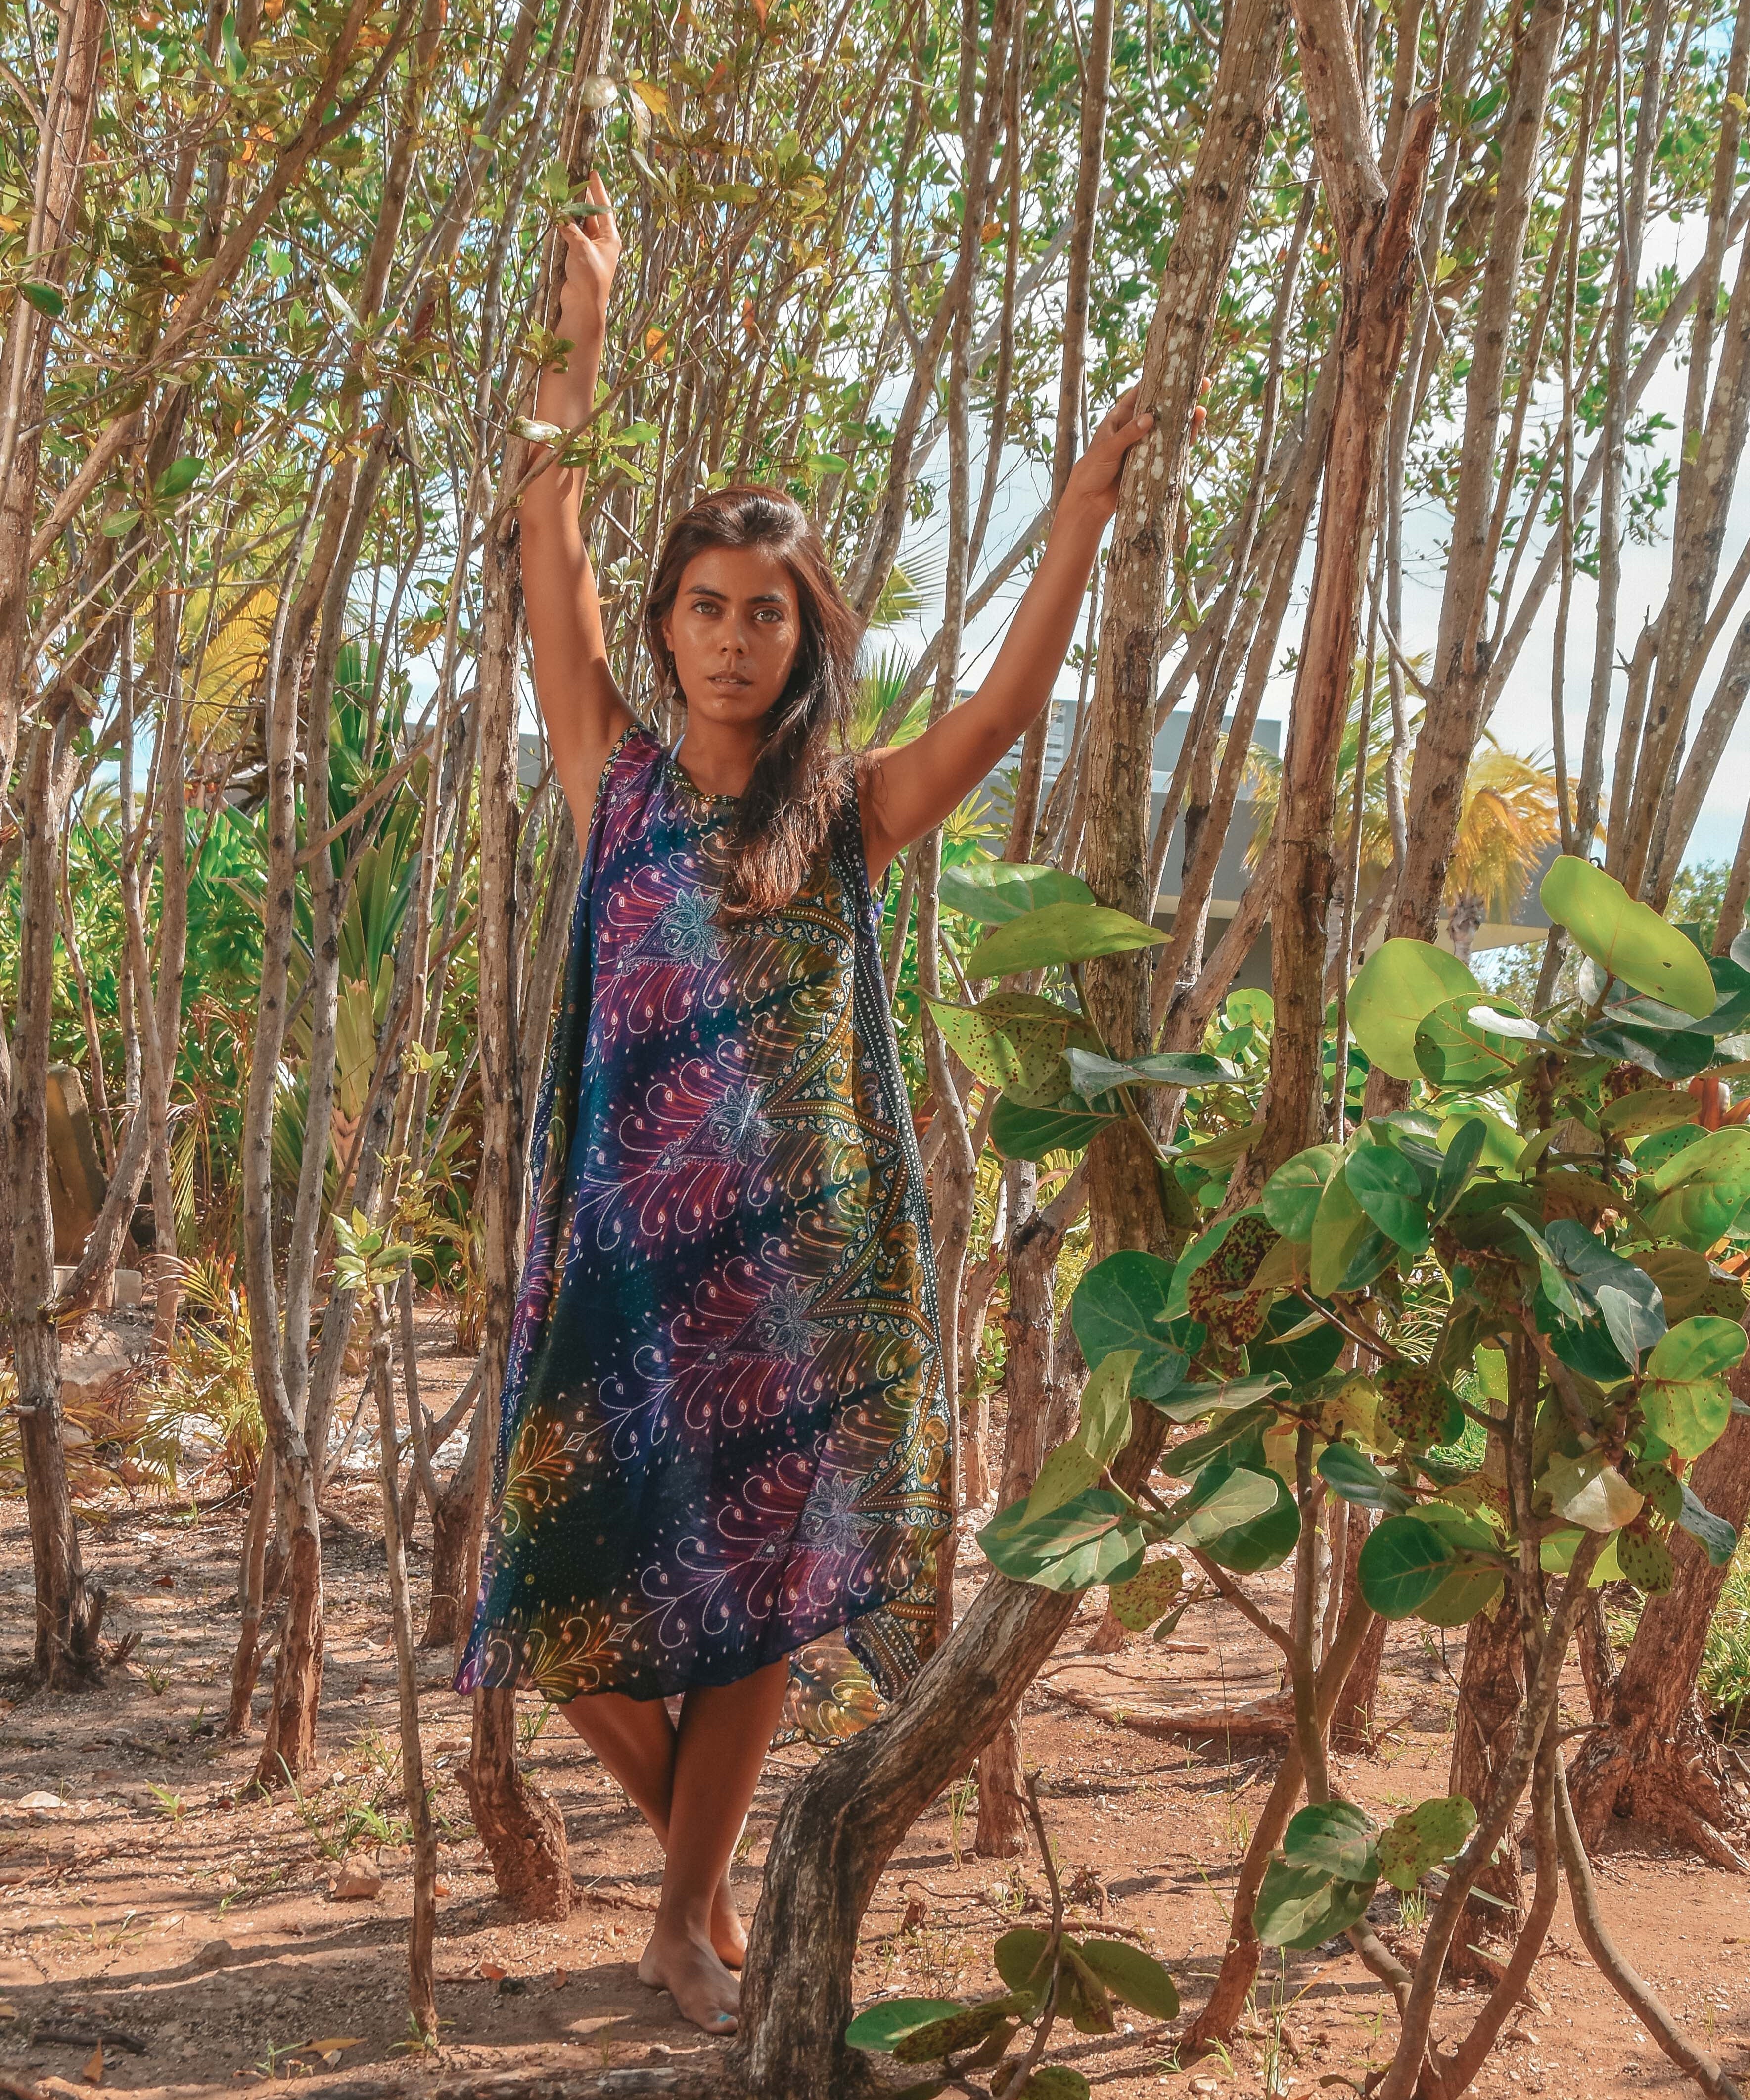 TULUM DRESS Elepanta Dresses - Buy Today Elephant Pants Jewelry And Bohemian Clothes Handmade In Thailand Help To Save The Elephants FairTrade And Vegan